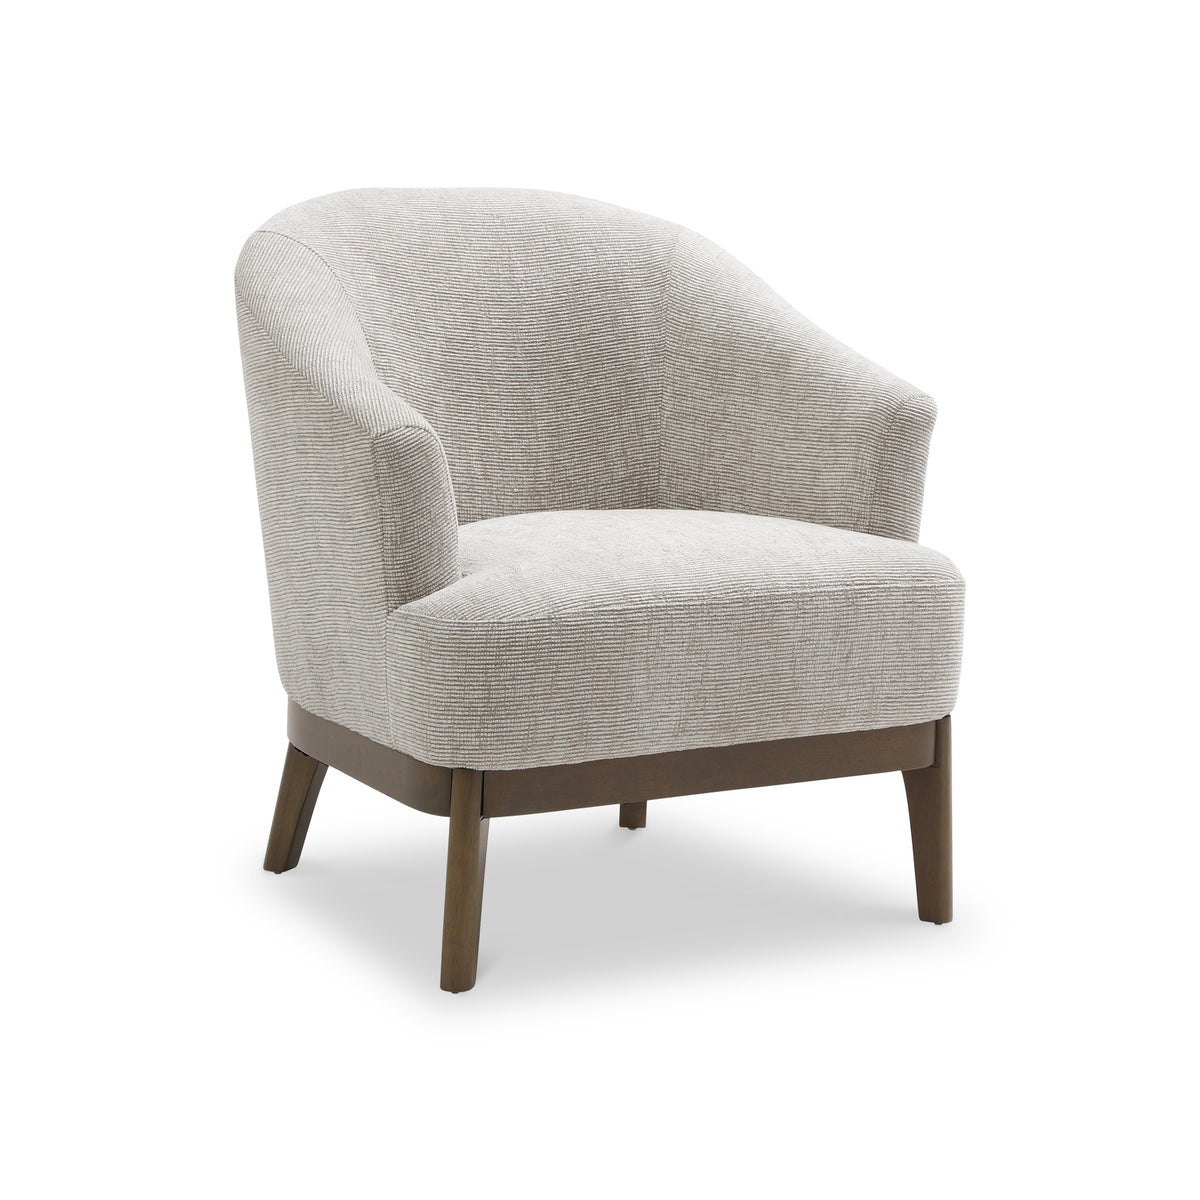 Toira Natural Woven Chenille Chair from Roseland Furniture